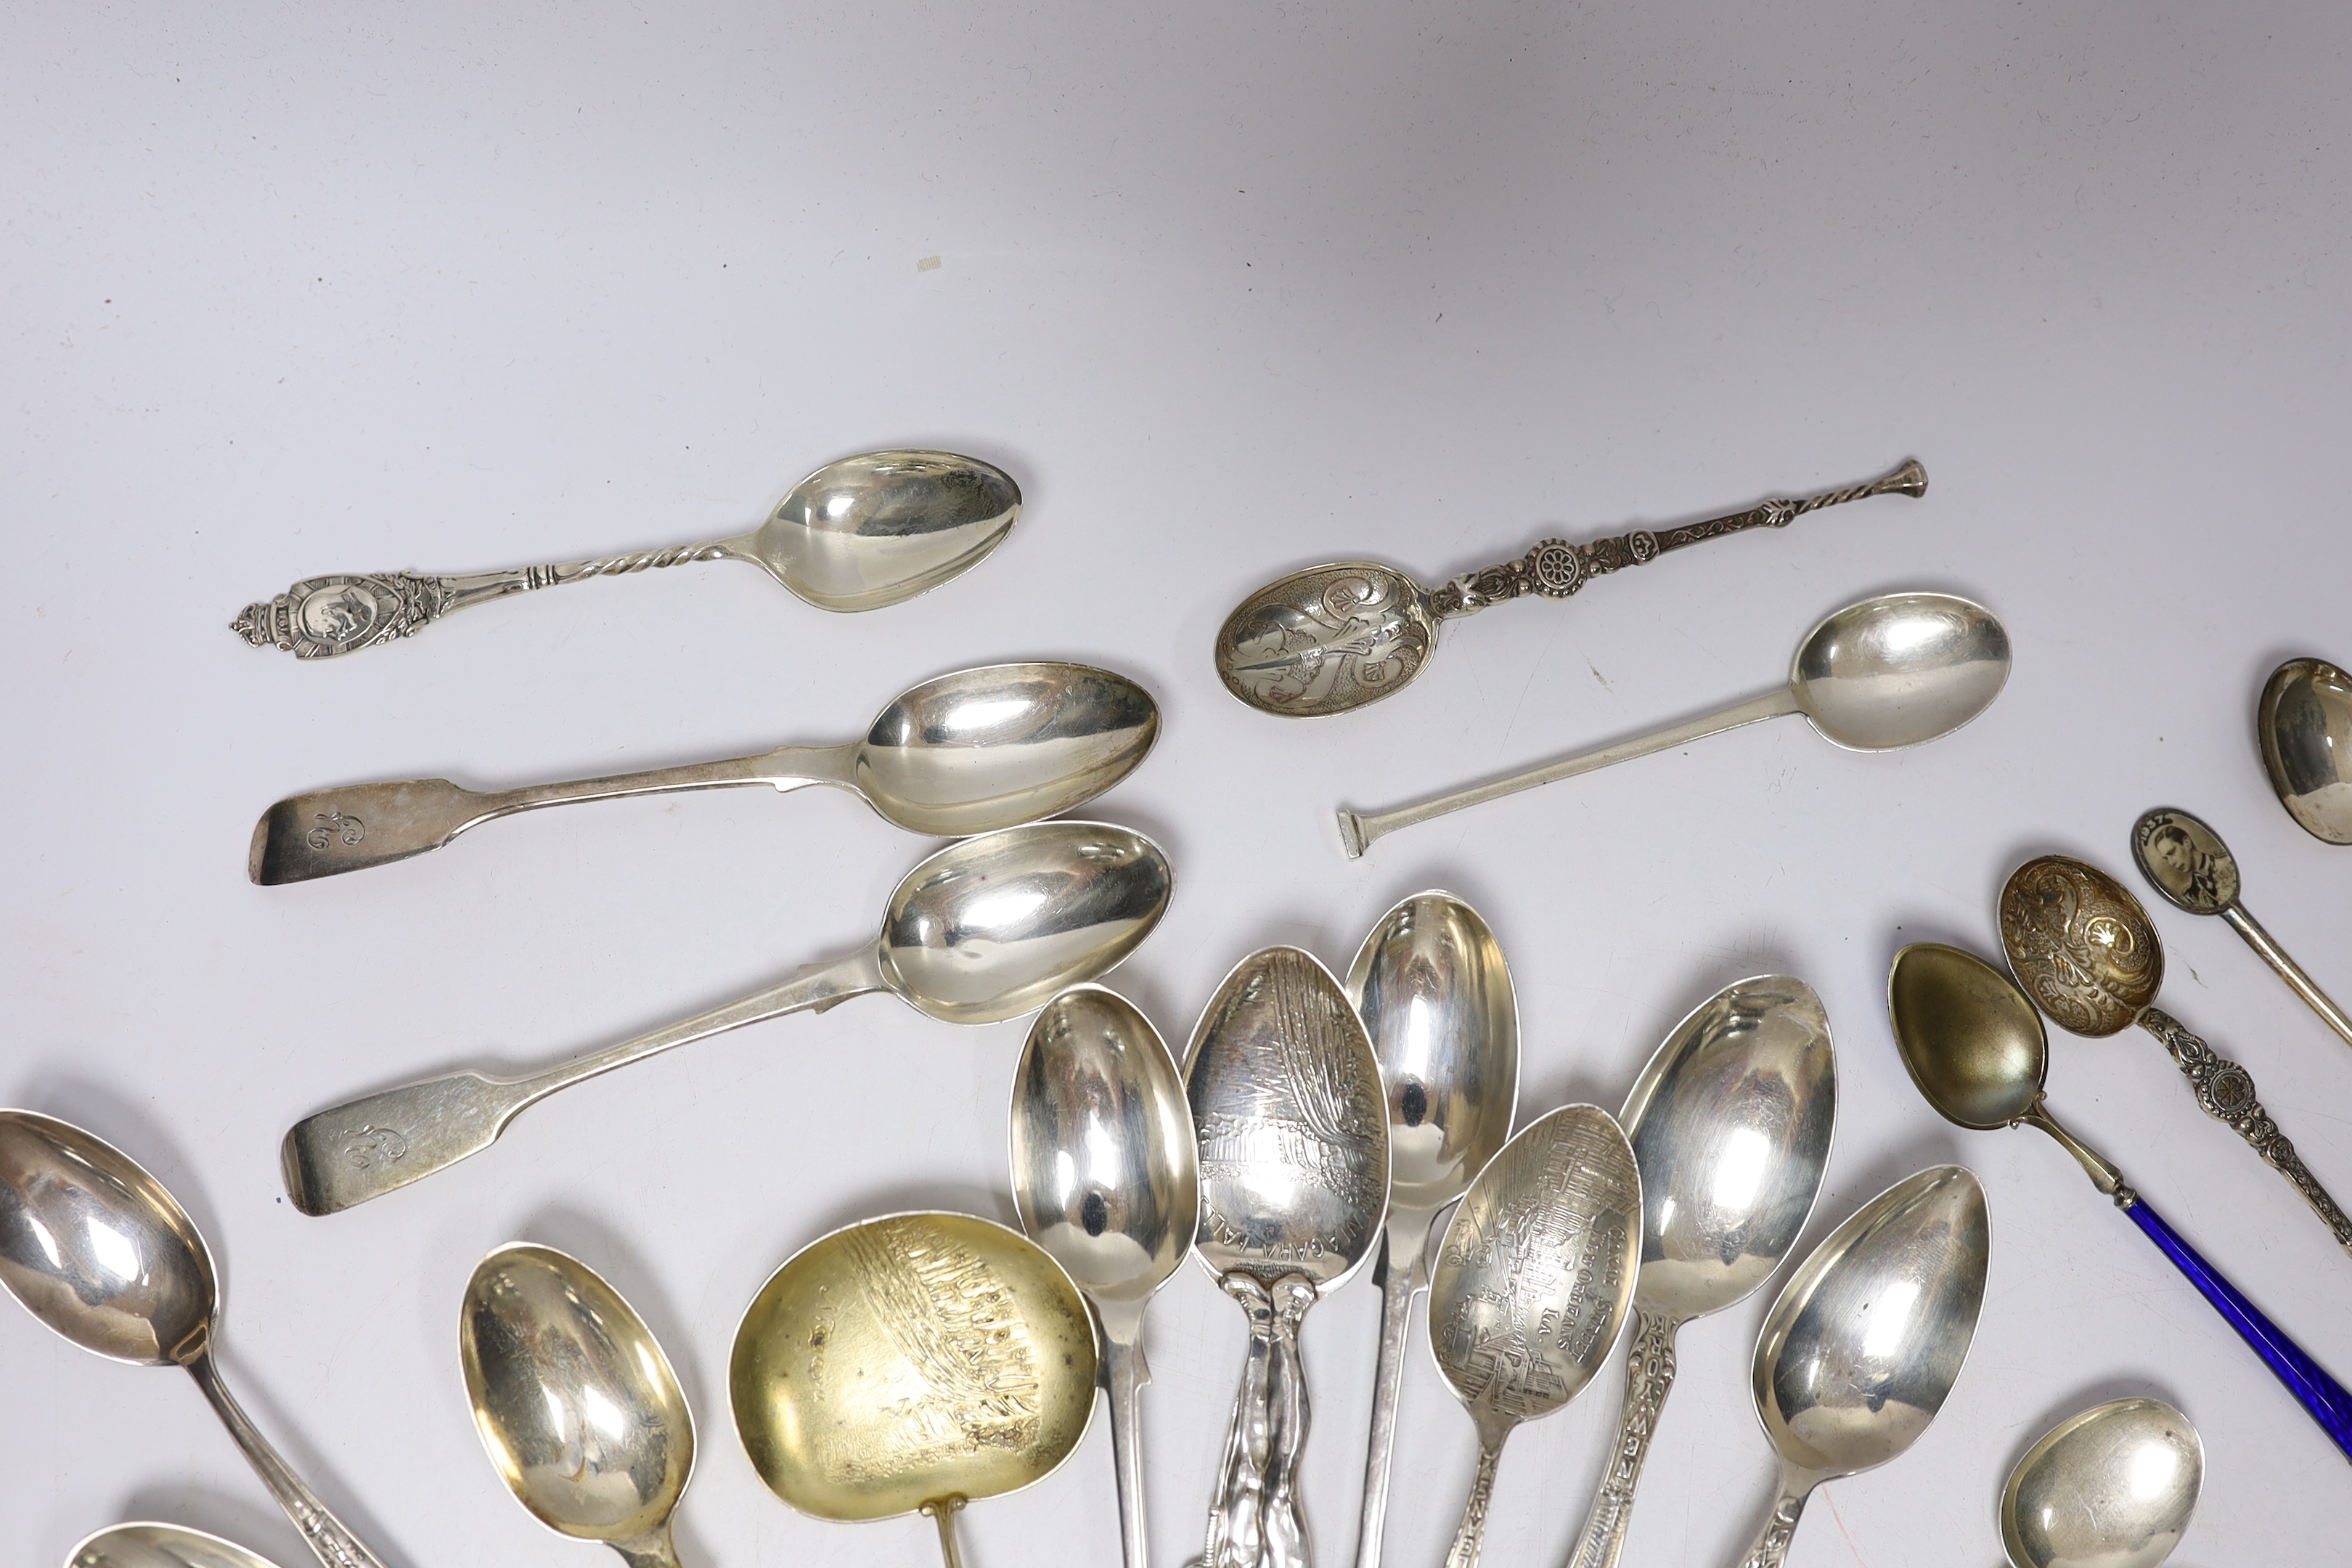 A small group of assorted silver and sterling small spoons, including commemorative etc. and some continental white metal spoons.